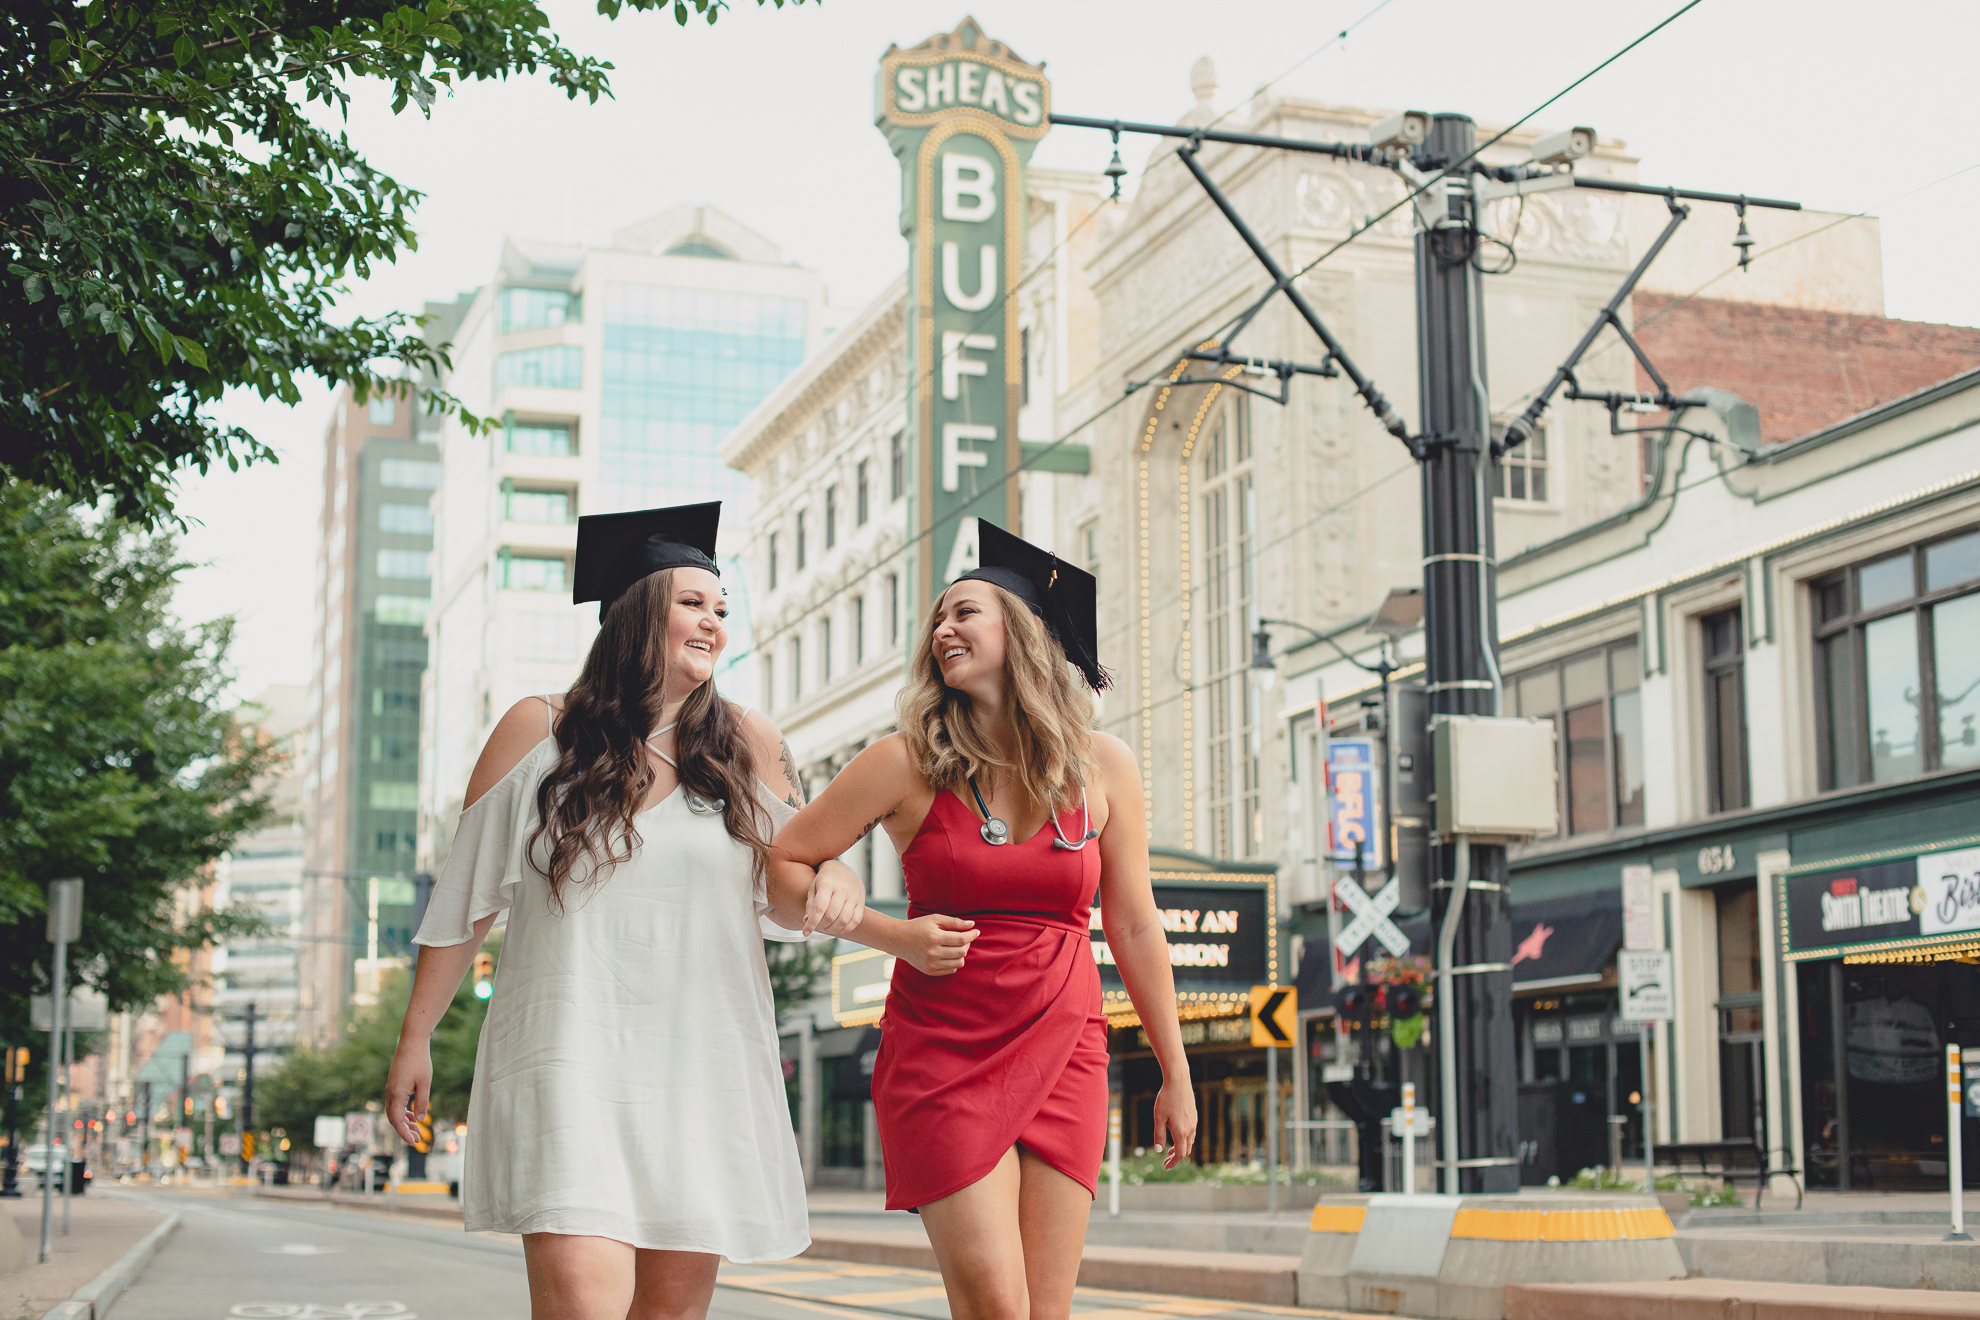 D'youville nursing students walk together laughing in front of Shea's Theater sign during senior portrait photography in Buffalo, NY